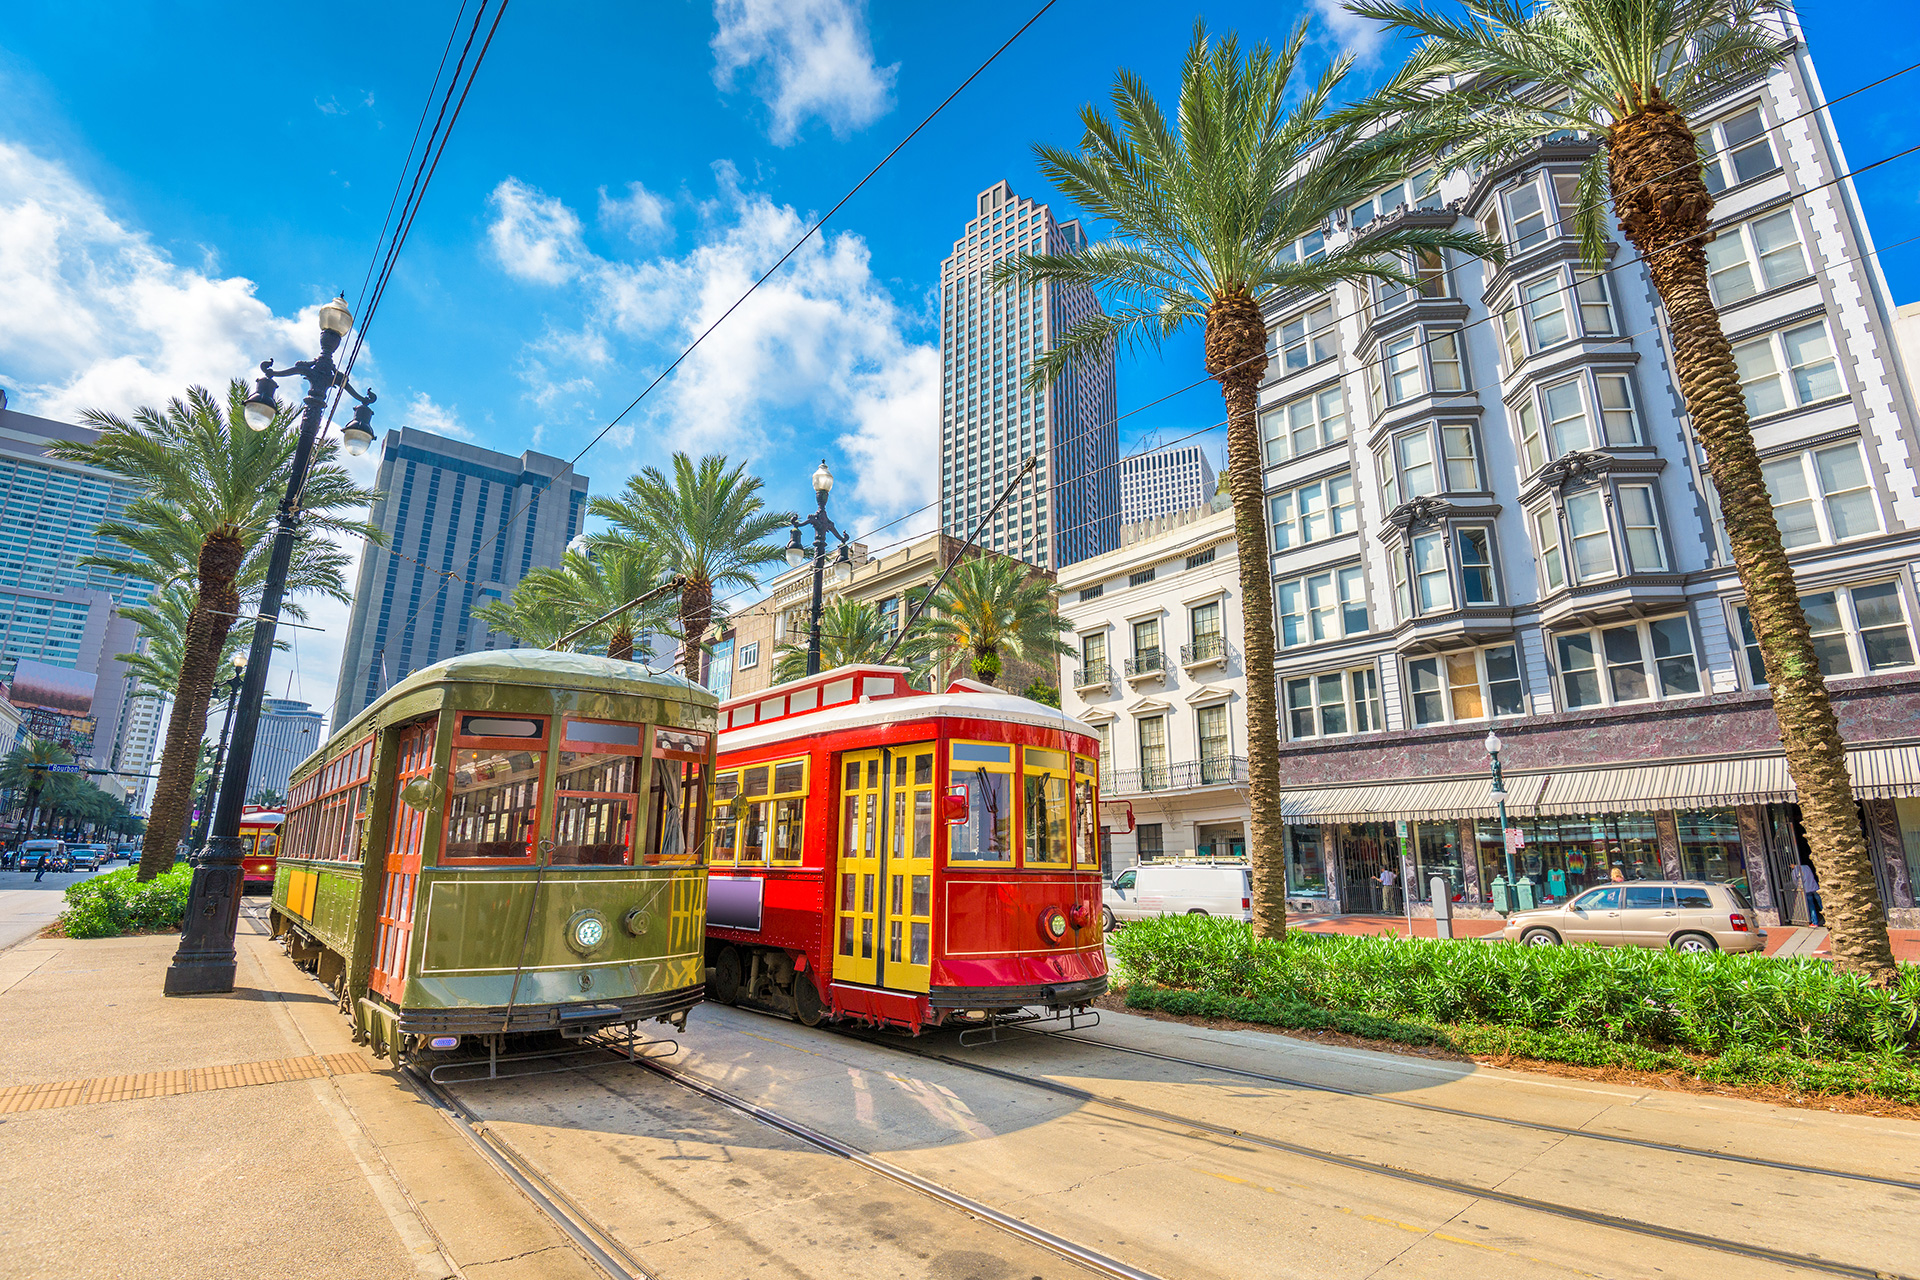 Street Cars in New Orleans, Louisiana